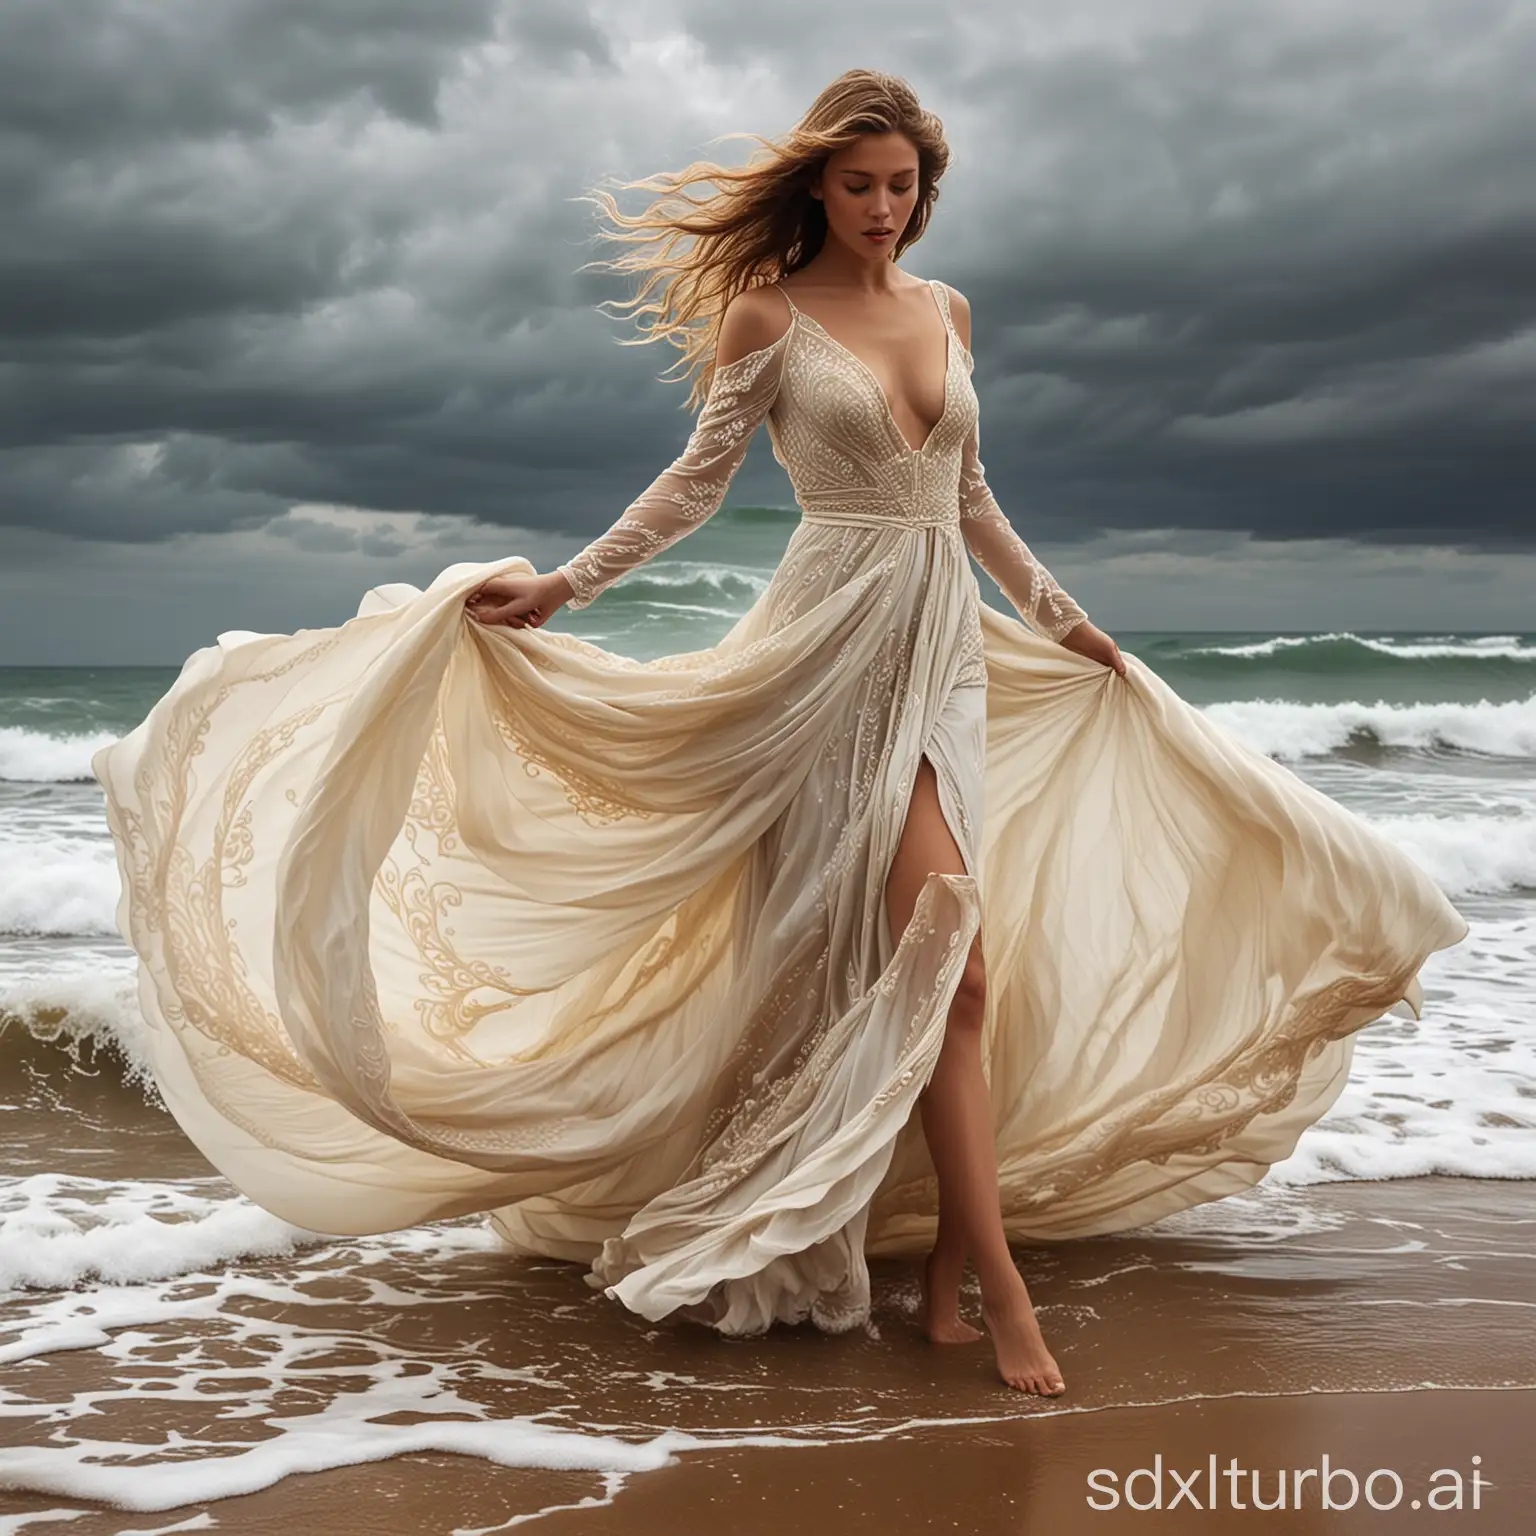 Woman-Strolling-in-Flowing-Ornate-Dress-with-Windy-Flair